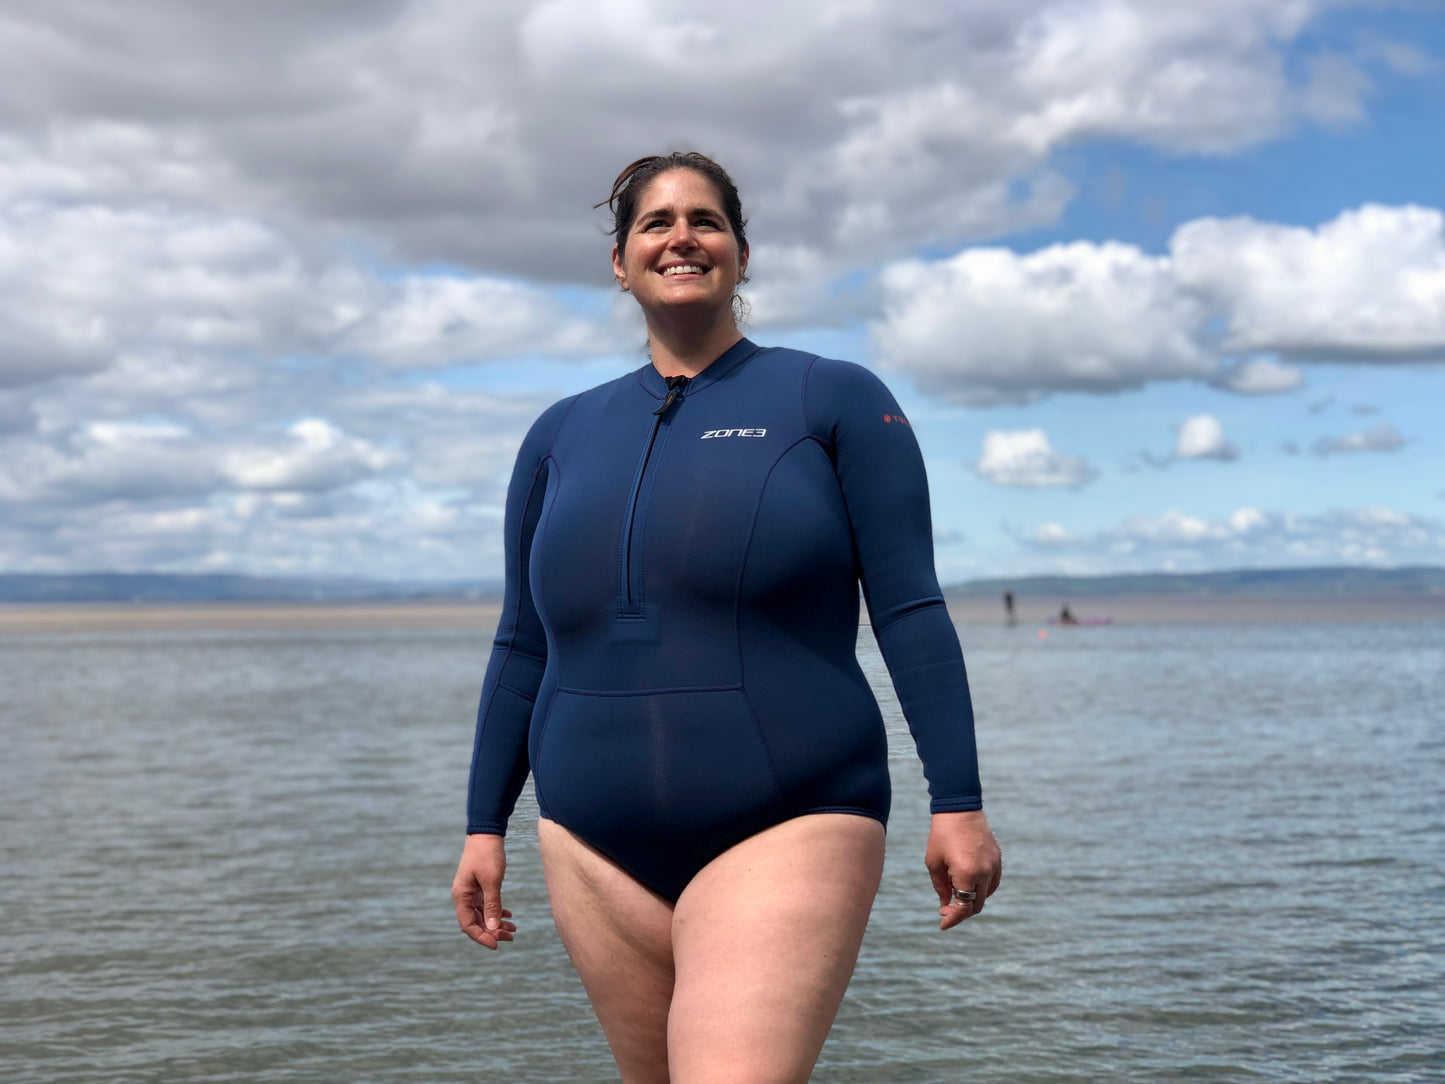 A plus size Swimmer by a lake after a cold water swim wearing the Zone 3 Women's Yulex Long sleeve Swimsuit in XL size.